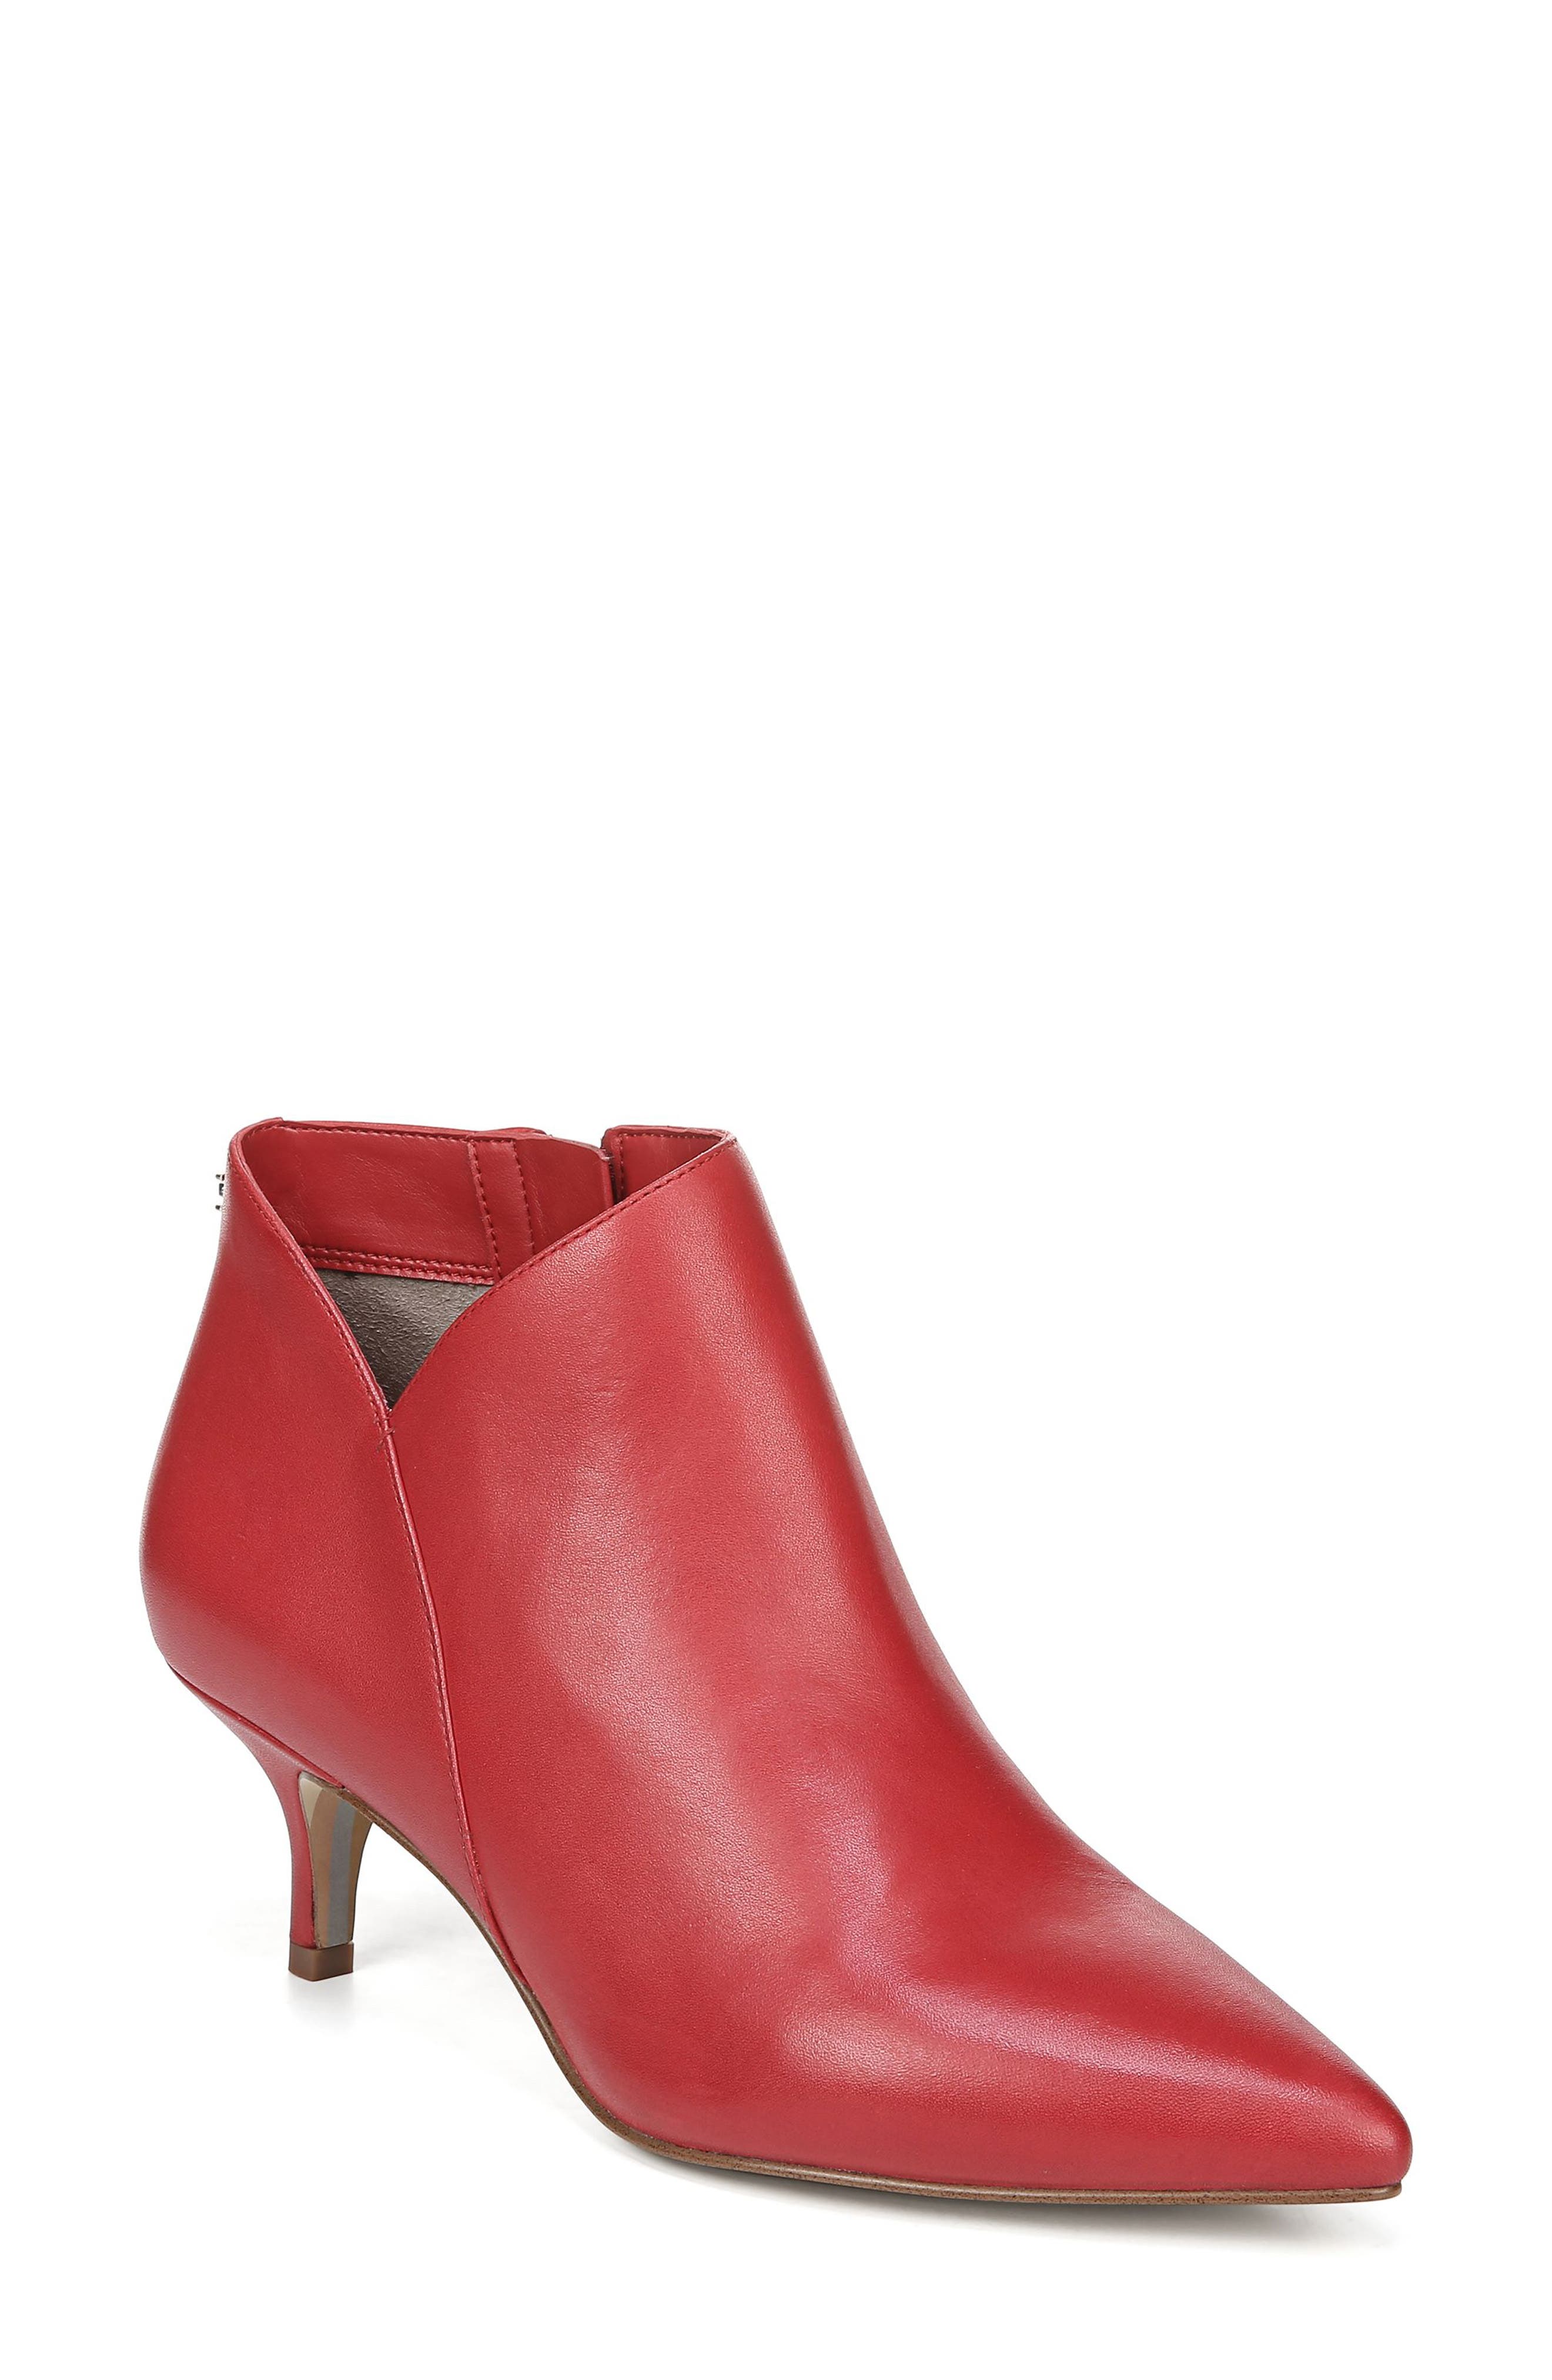 red leather pointed toe booties